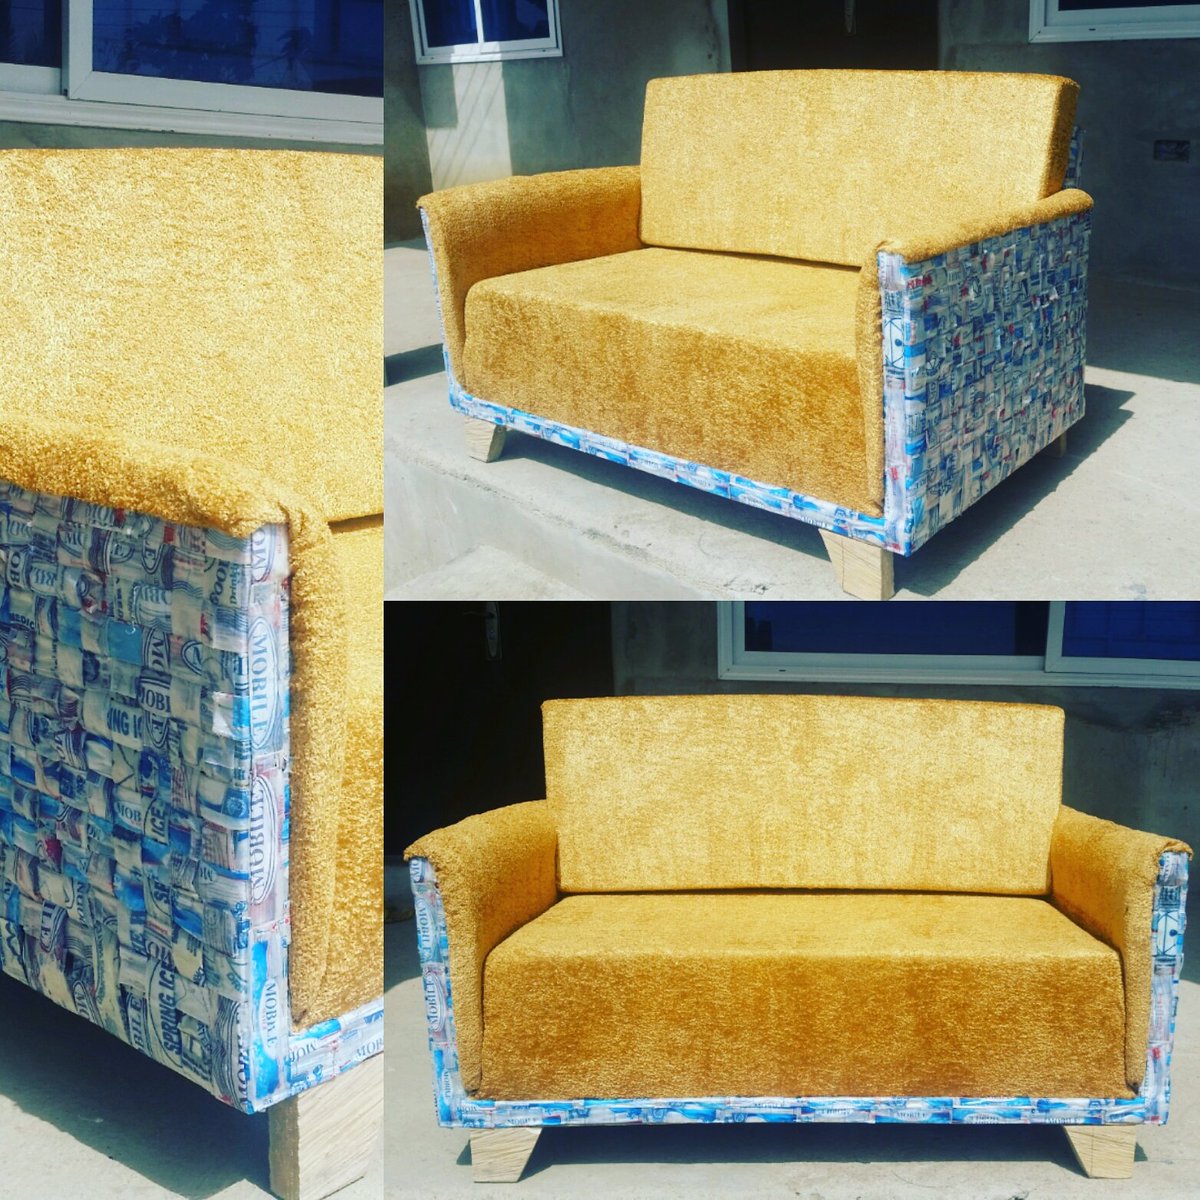 Sofa made out of plastic waste
#wastehasworth #plasticwasterecycling #yawarth